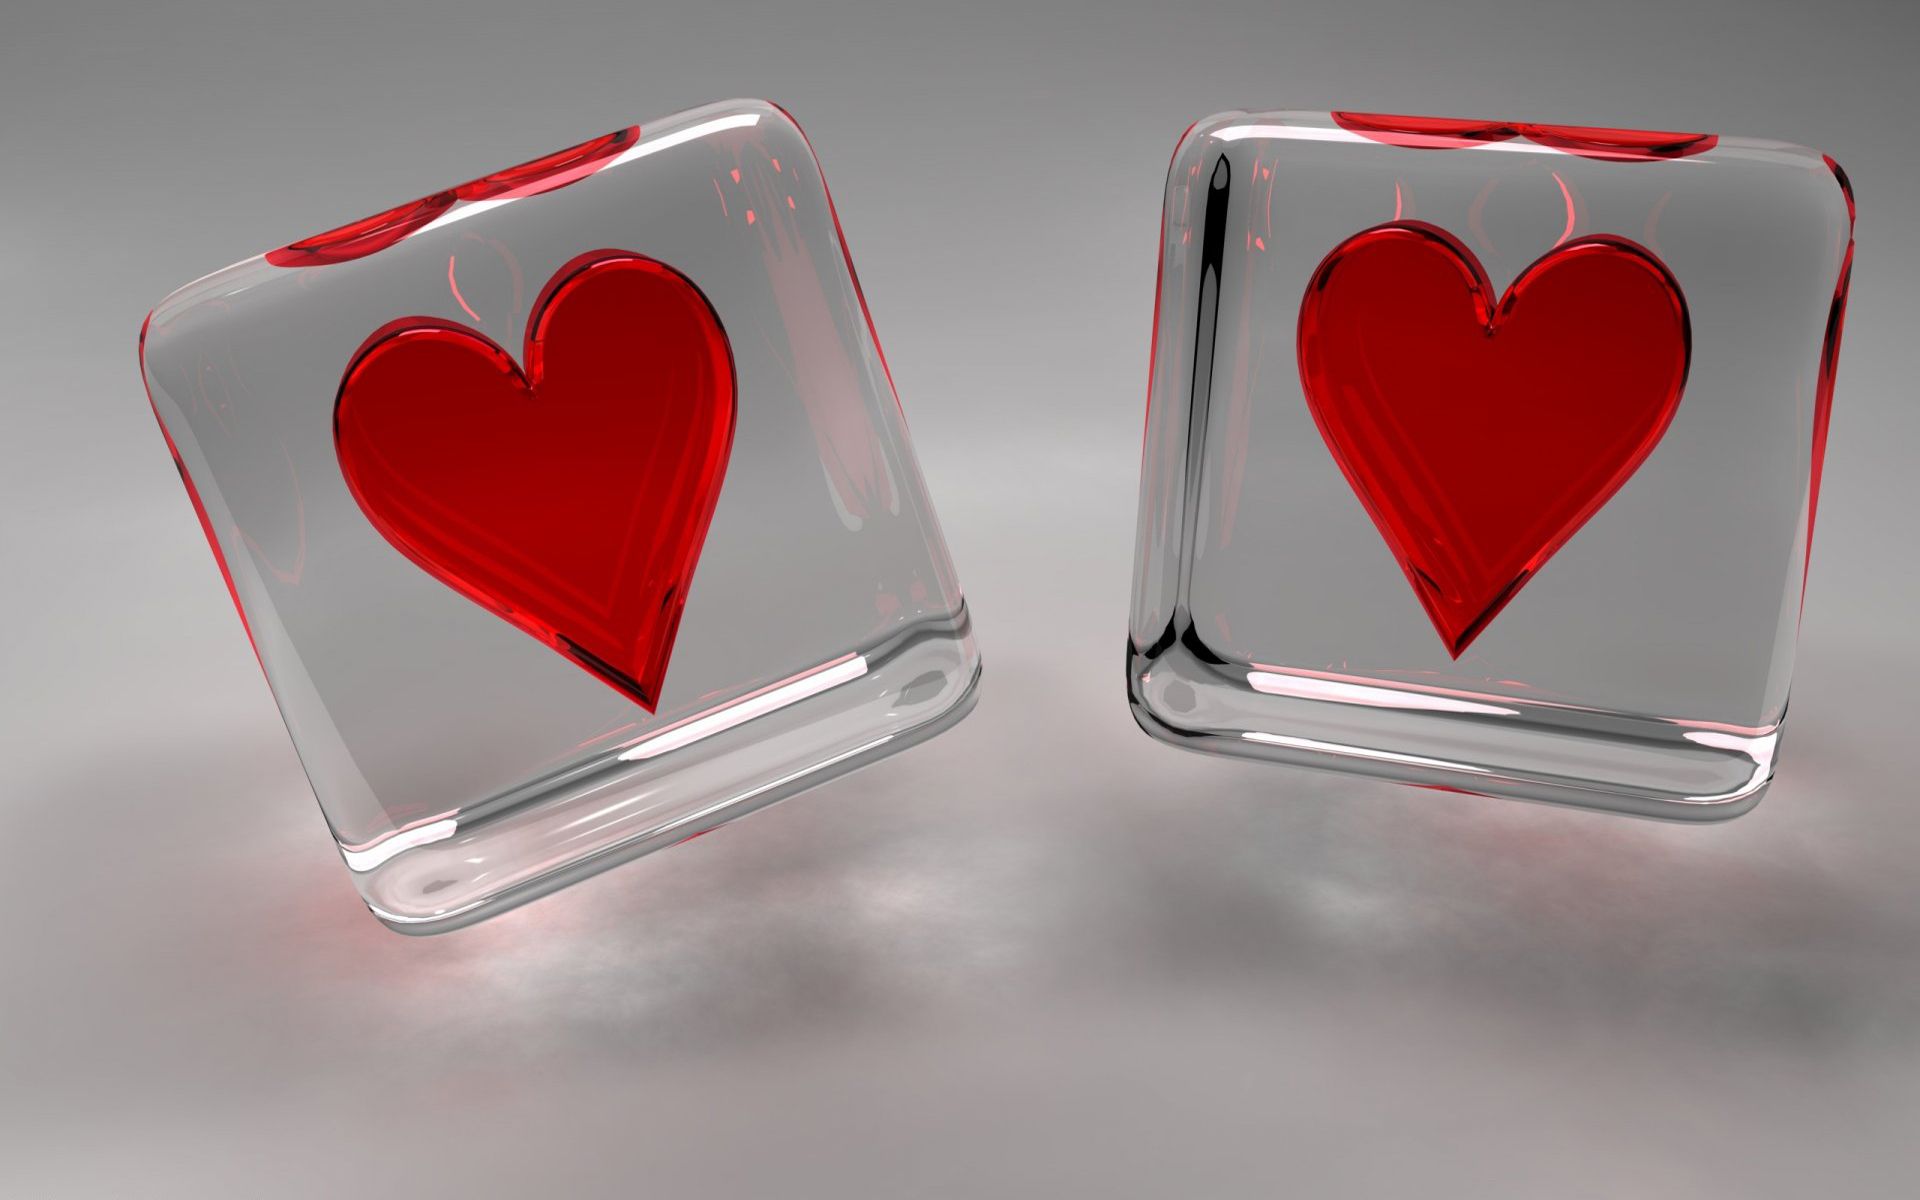 Stylish Valentines day background with 3d red and gray hearts - Stock Image  - Everypixel